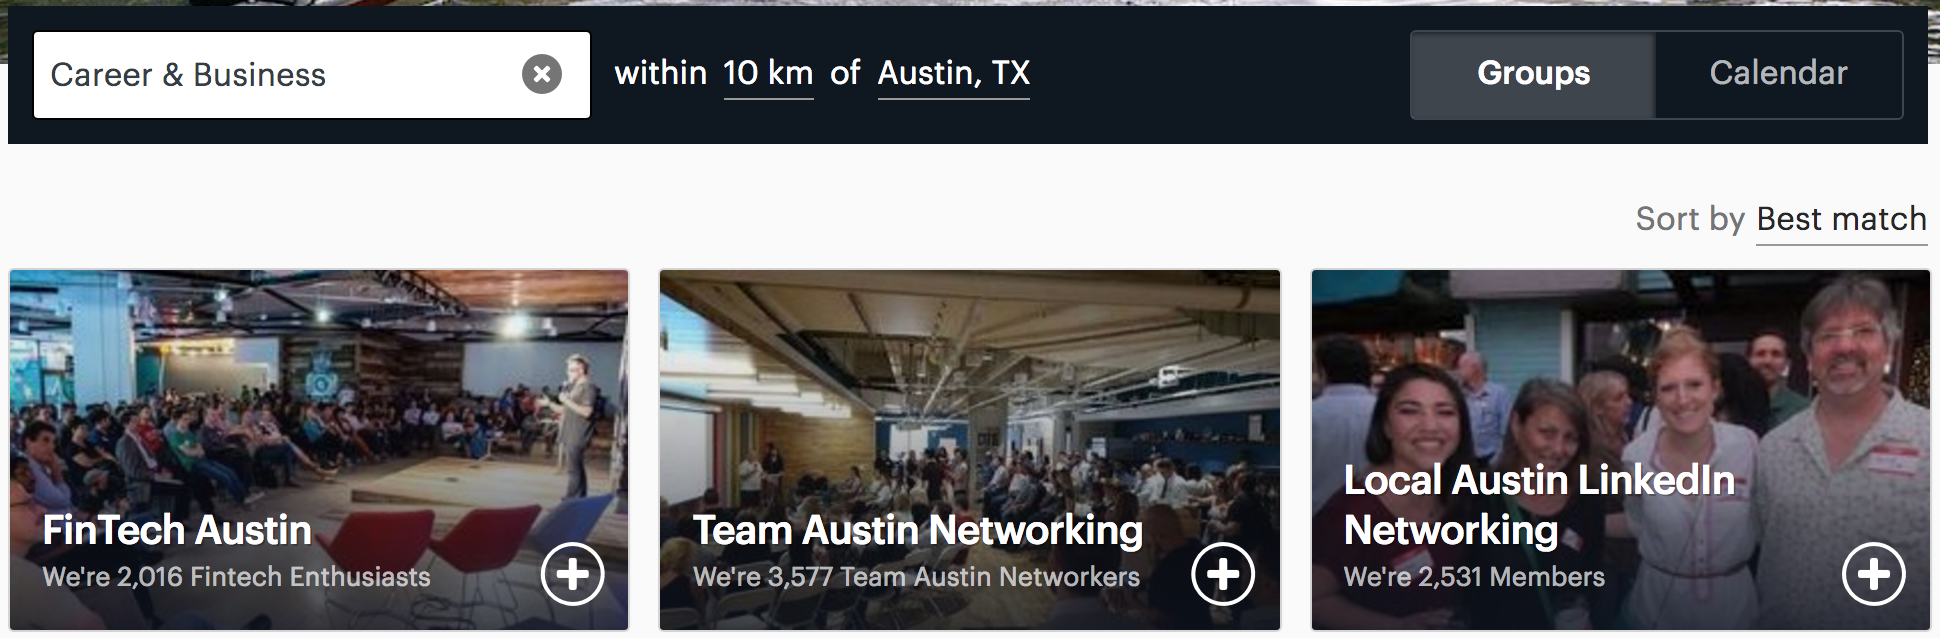 Screenshot showing a MeetUps search for Career & Business in Austin